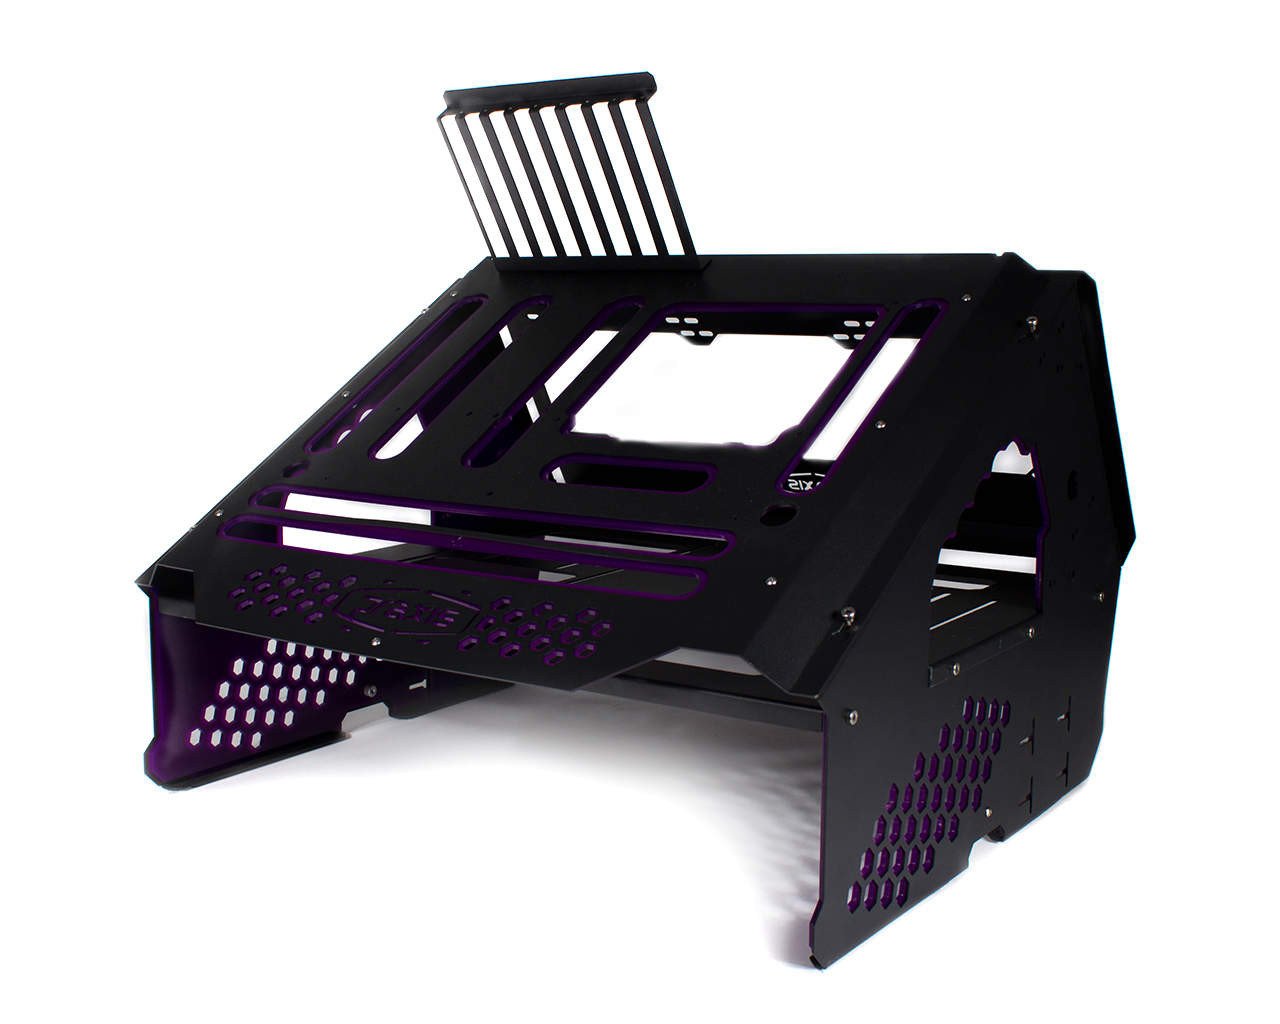 PrimoChill's Praxis Wetbench Powdercoated Steel Modular Open Air Computer Test Bench for Watercooling or Air Cooled Components - PrimoChill - KEEPING IT COOL Black w/Solid Purple Accents